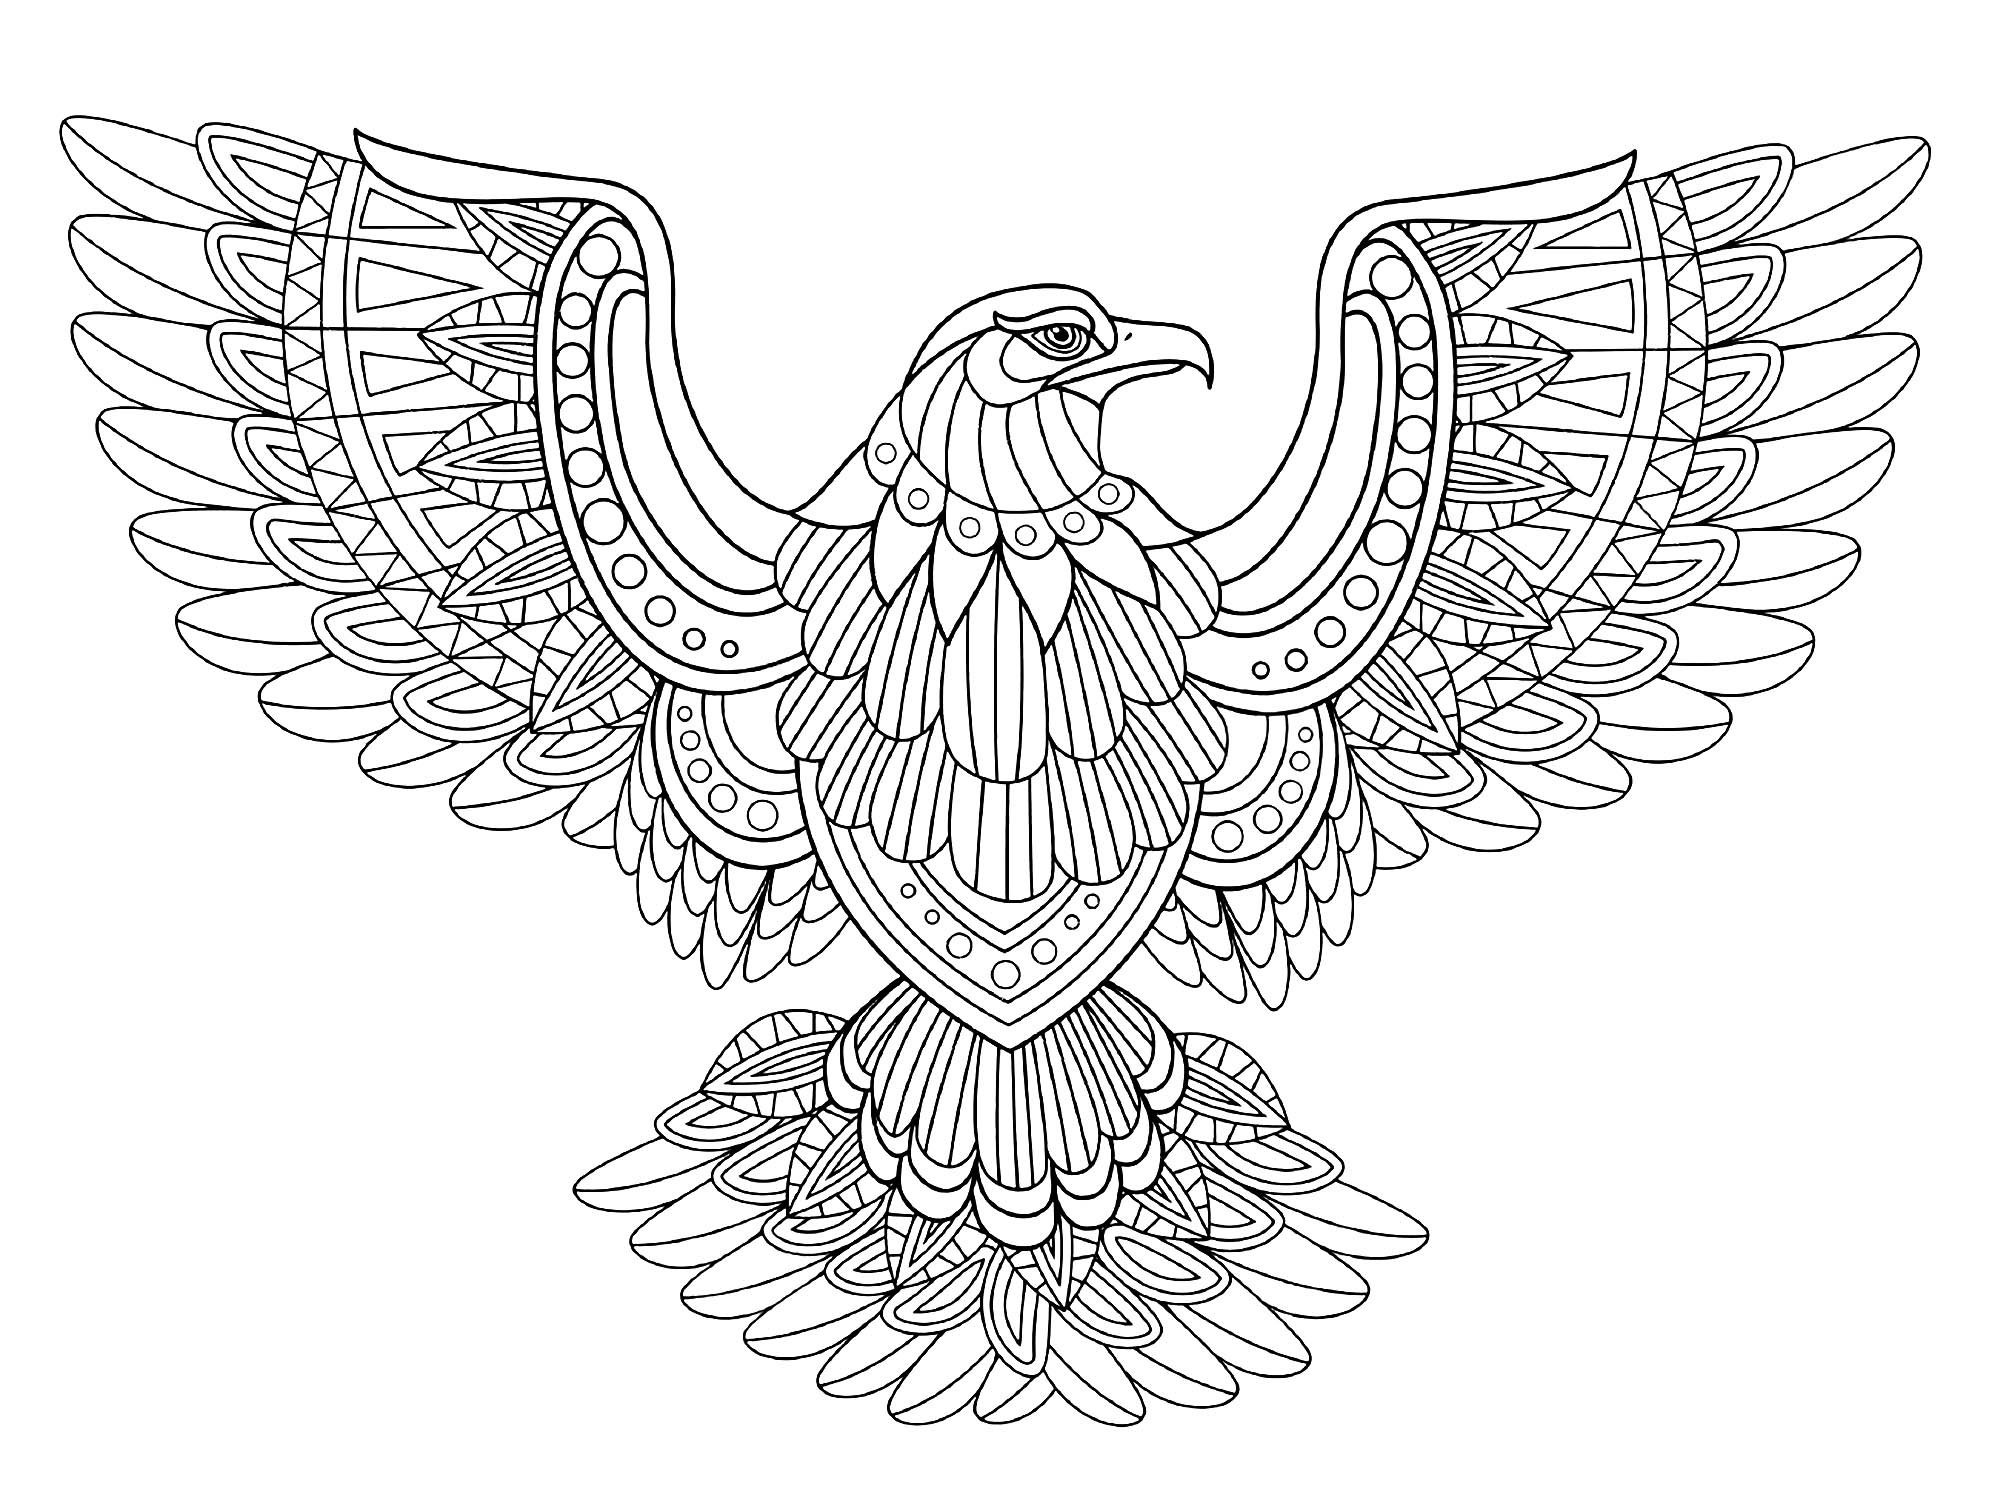 Eagle with spread wings, Artist : Kchung   Source : 123rf